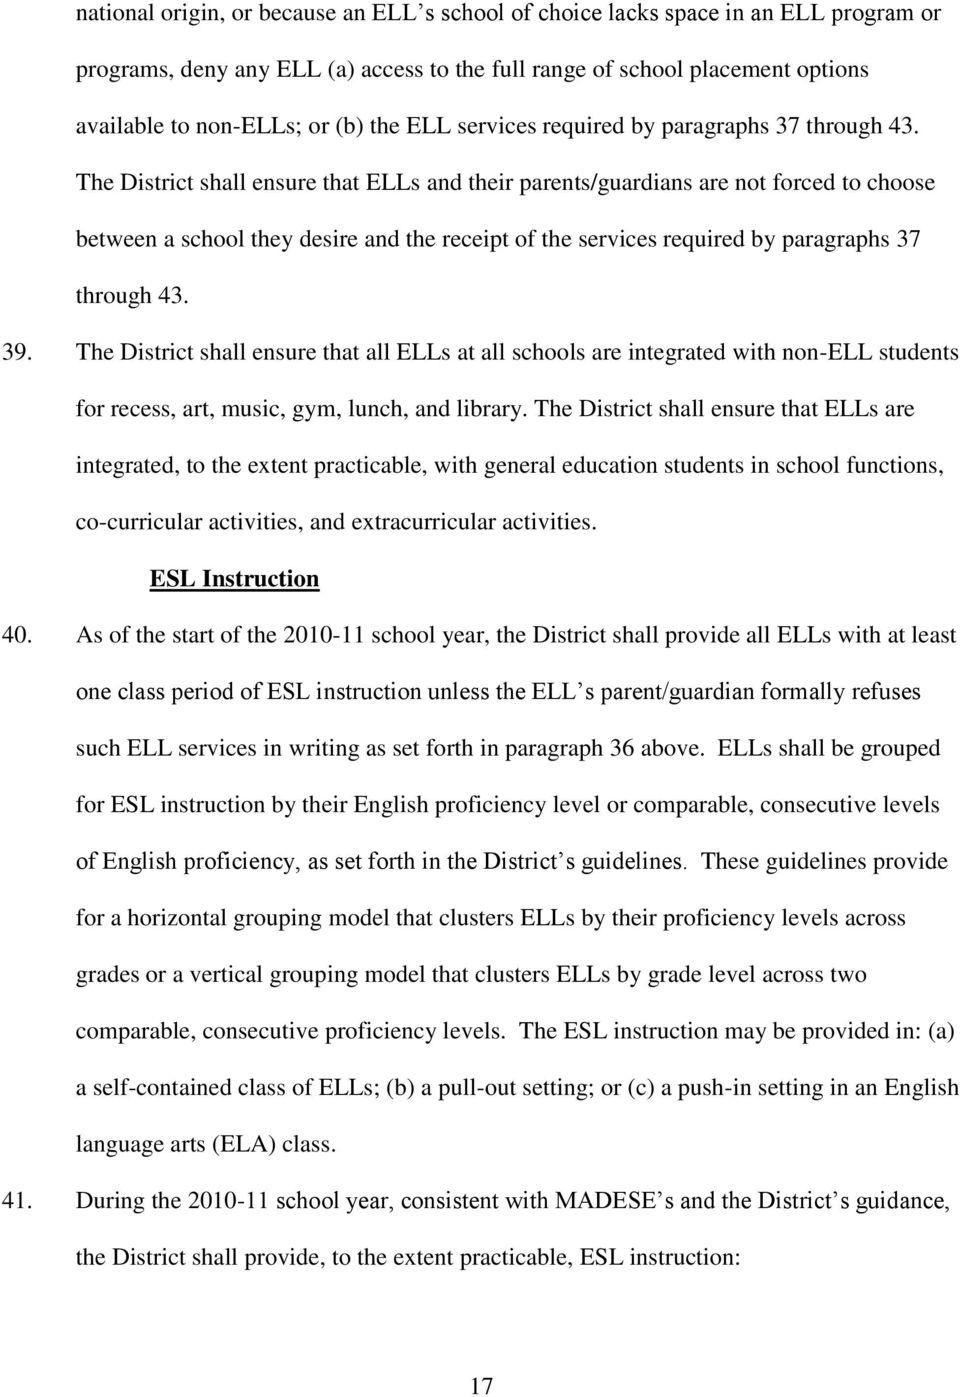 The District shall ensure that ELLs and their parents/guardians are not forced to choose between a school they desire and the receipt of the services required by paragraphs 37 through 43. 39.